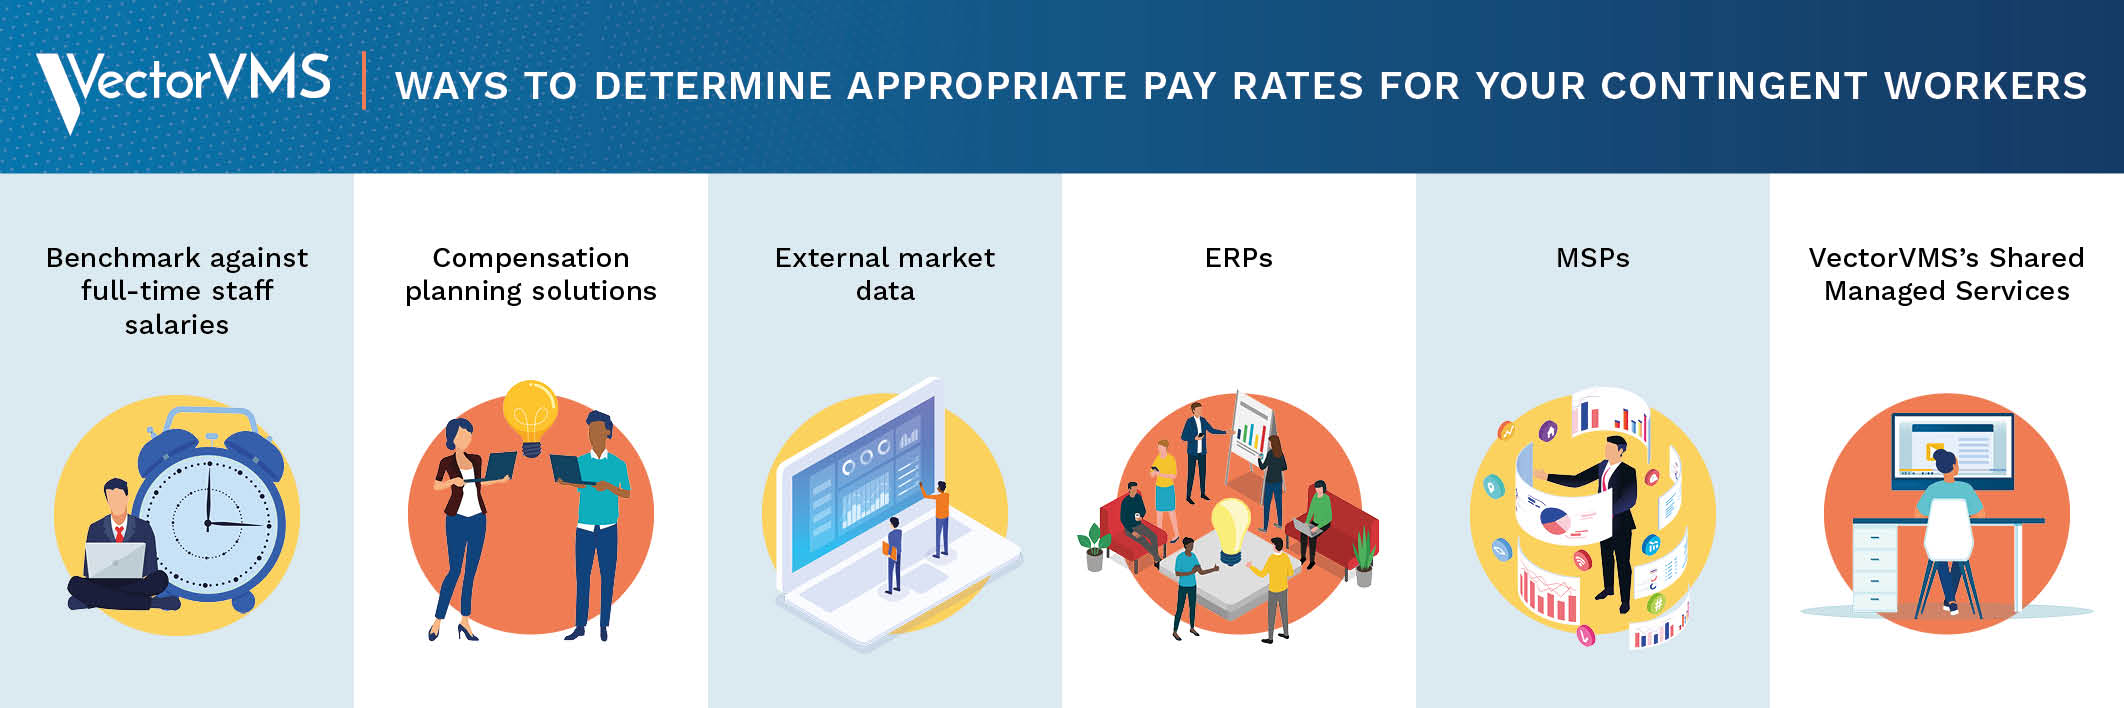 Ways to determine approriate pay rates for your contingent workers